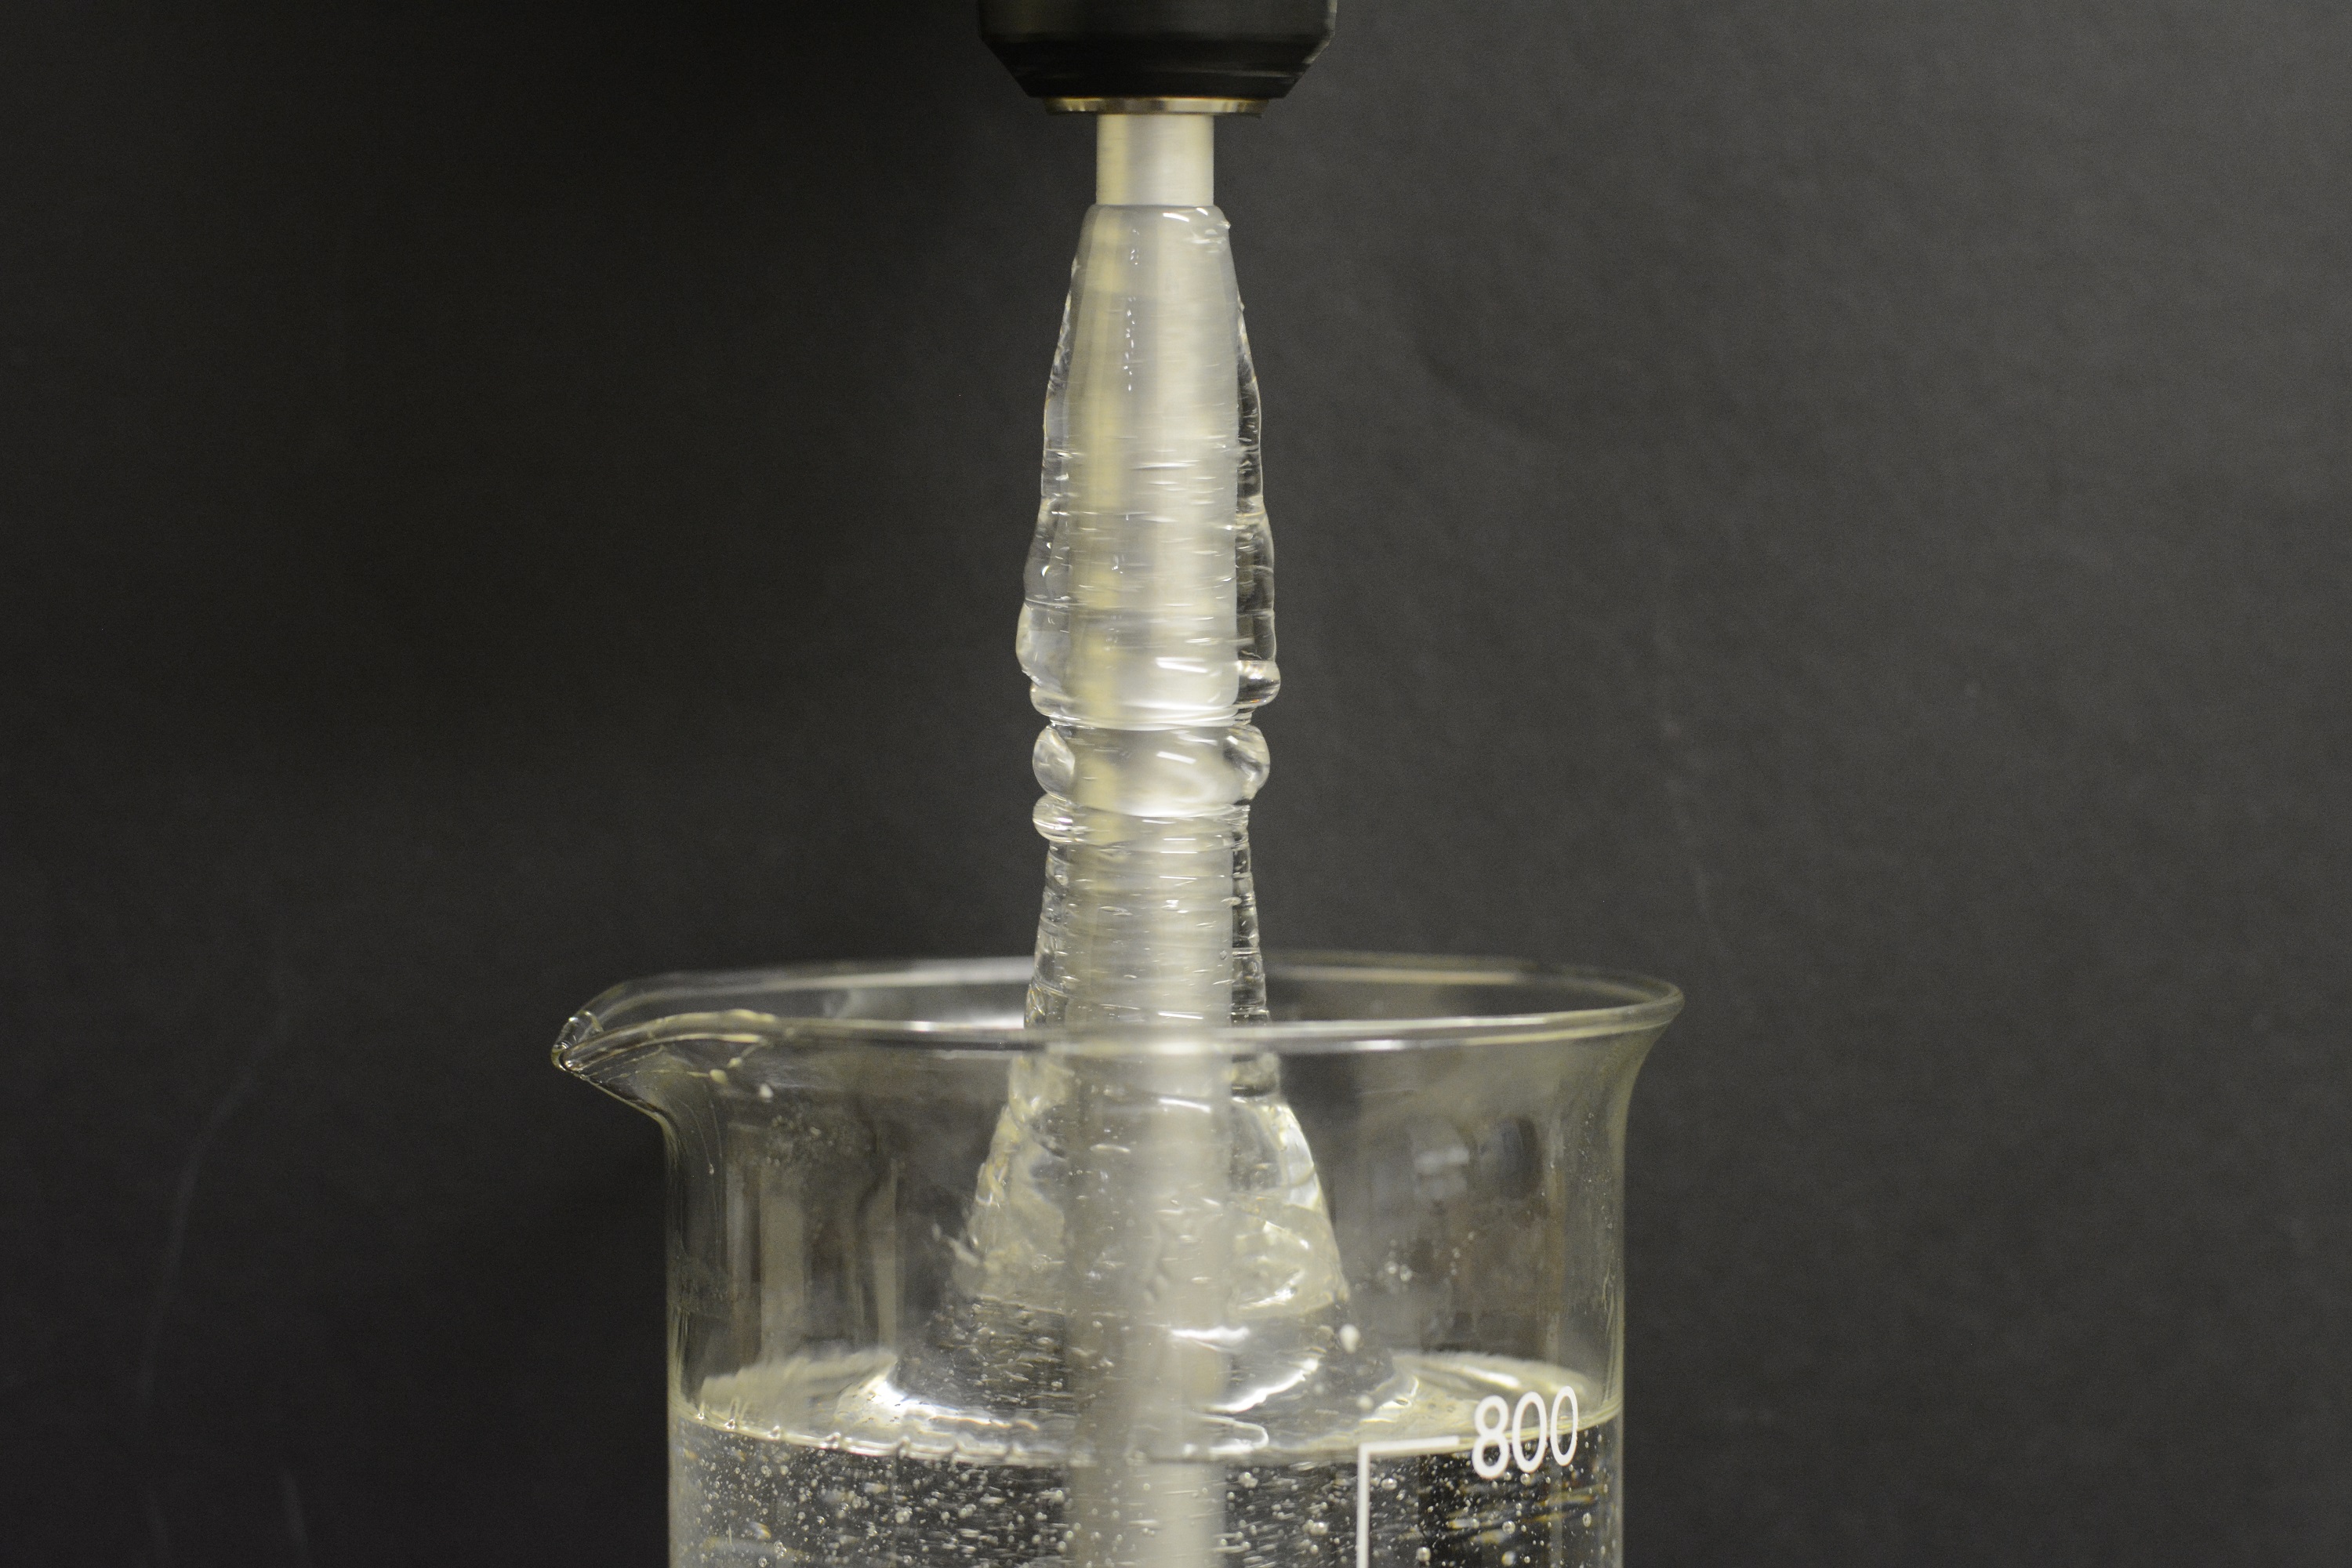 A rotating rod is partially submerged in an aqueous solution (~1wt%) of polyacrylamide acid (PAA).  With inertia present, a Newtonian fluid moves outwards toward the container walls.  Here, however, the fluid climbs the rod due to the elastic stresses generated along the streamlines by the rotation of the rod. The photo is not a composite and has not been enhanced.
